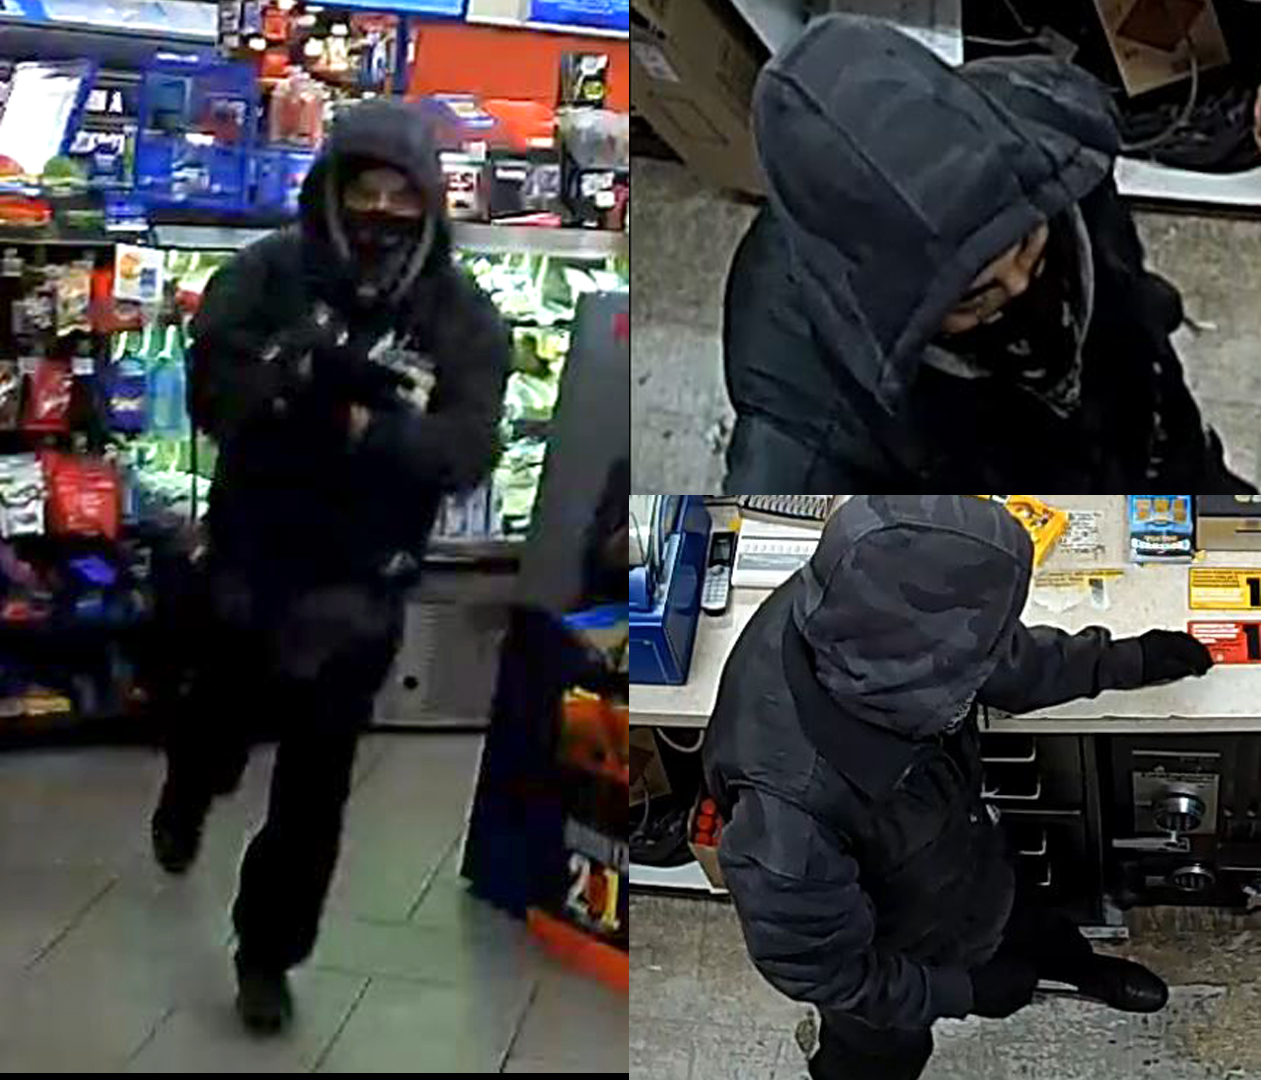 Suspect to ID – Two convenience store robberies